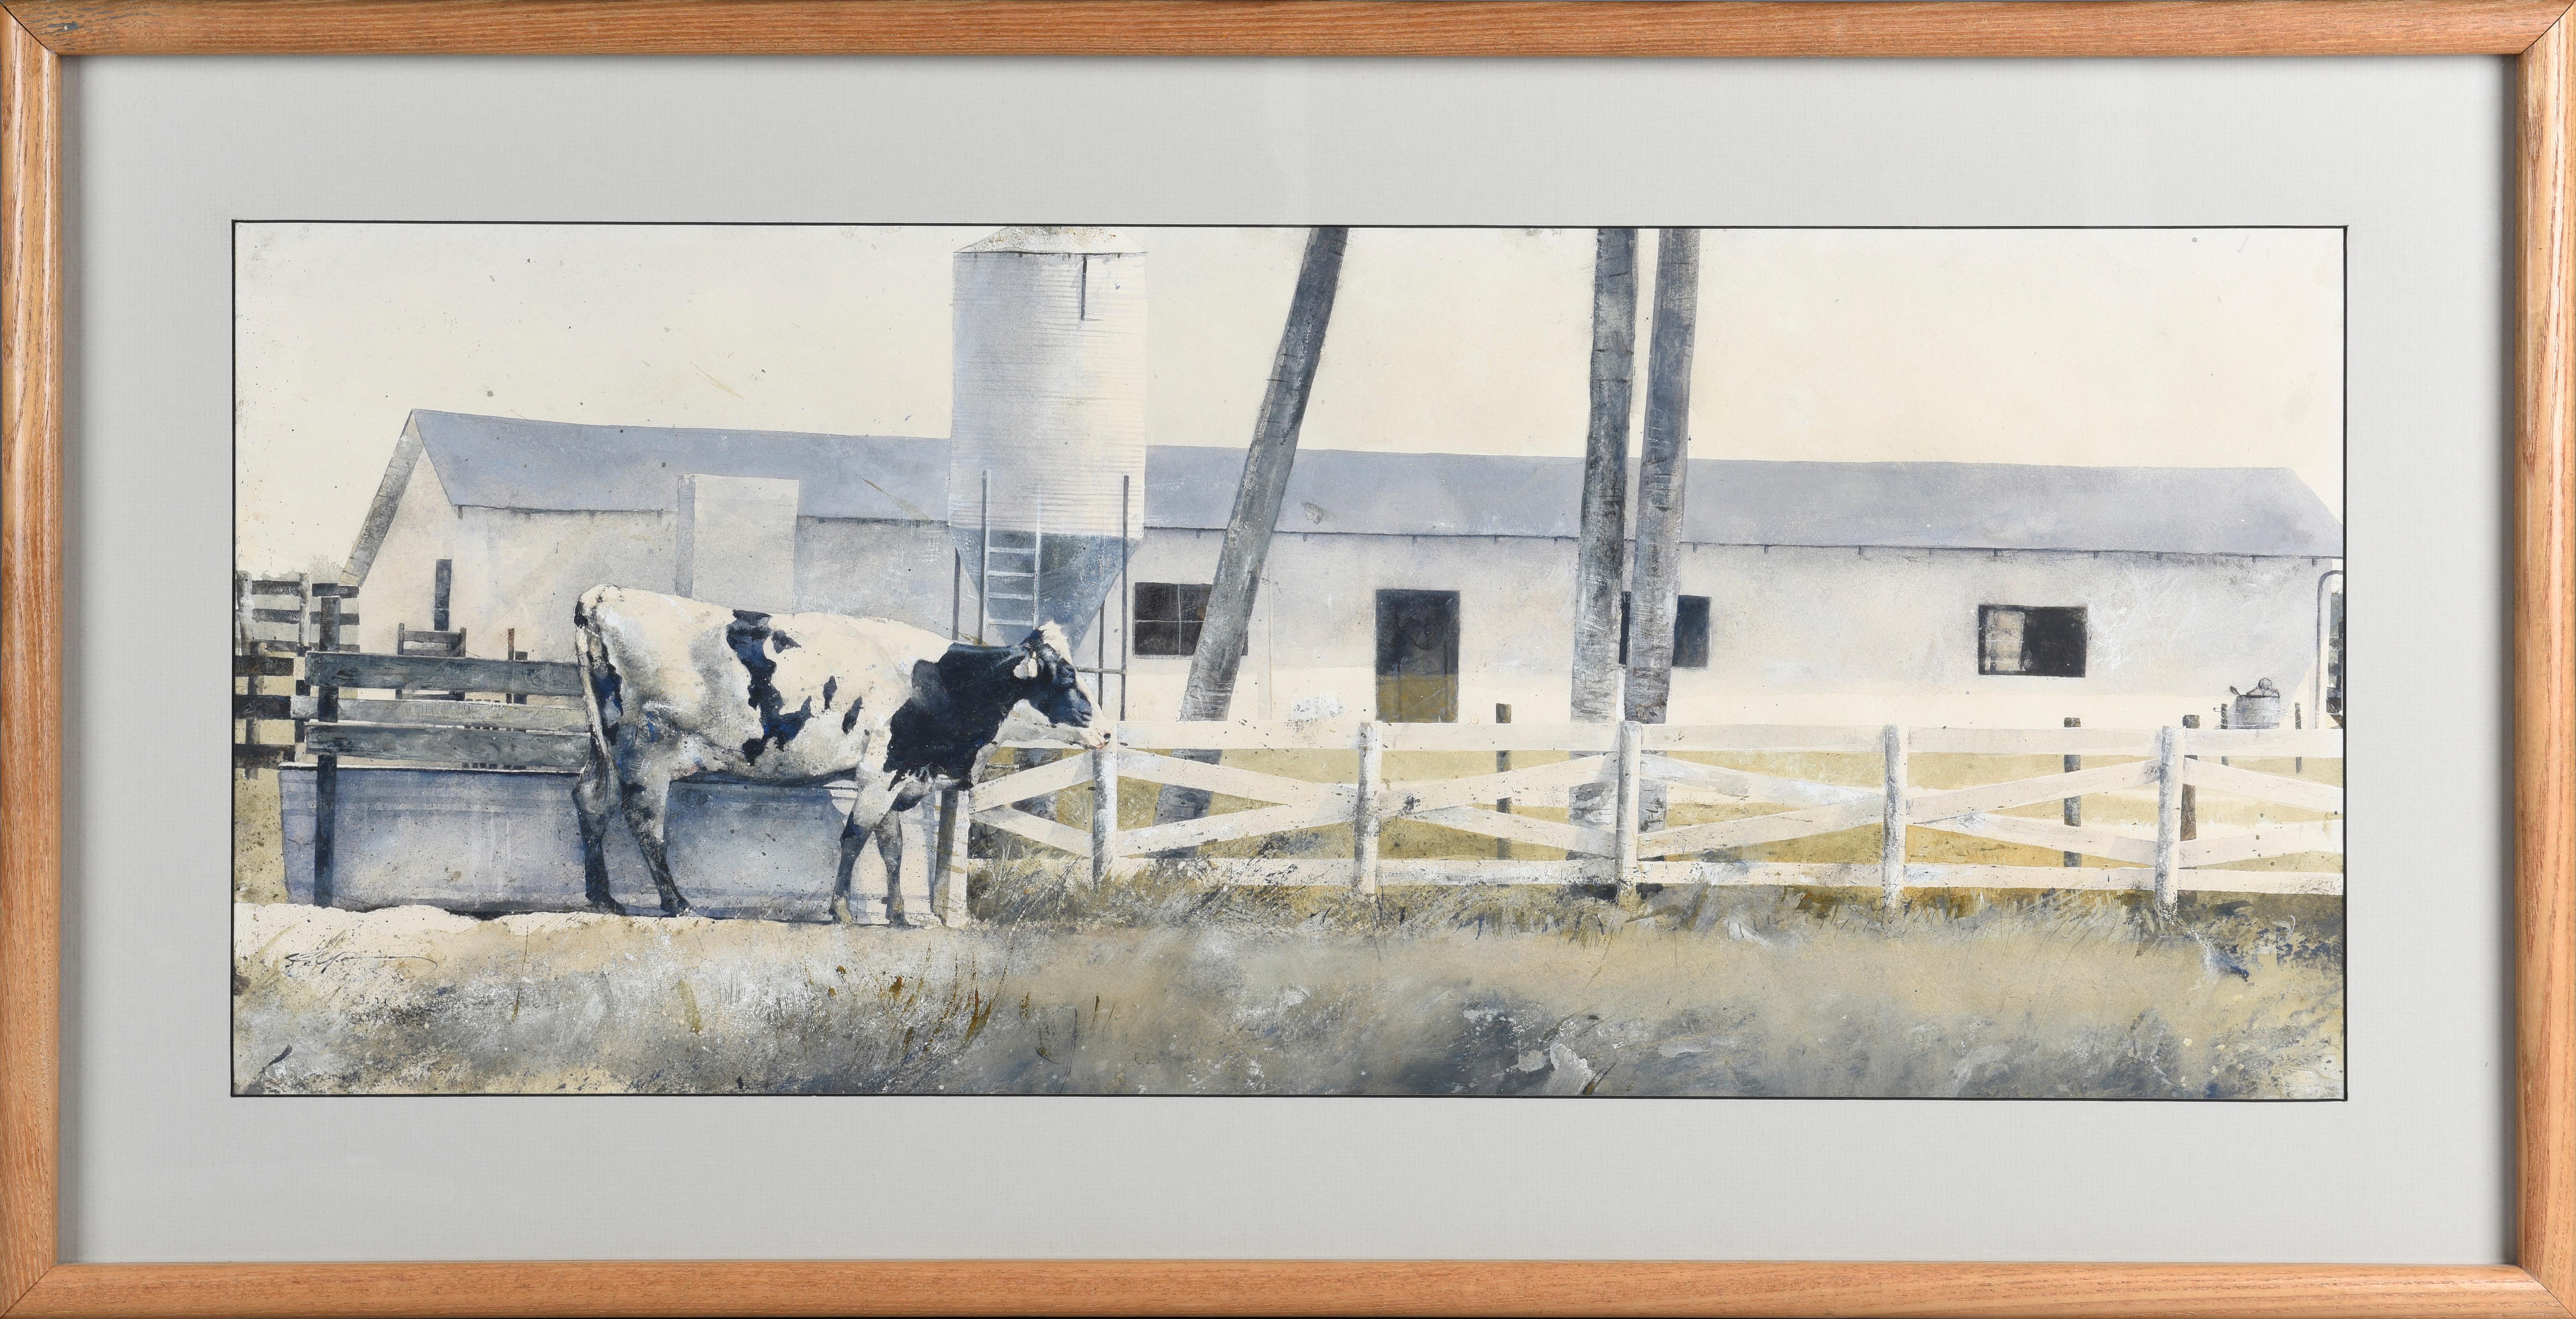 Stephen Scott Young is known for figure, landscape paintings and etchings. This is a fine watercolor of a farm scene probably in Florida where he lives.